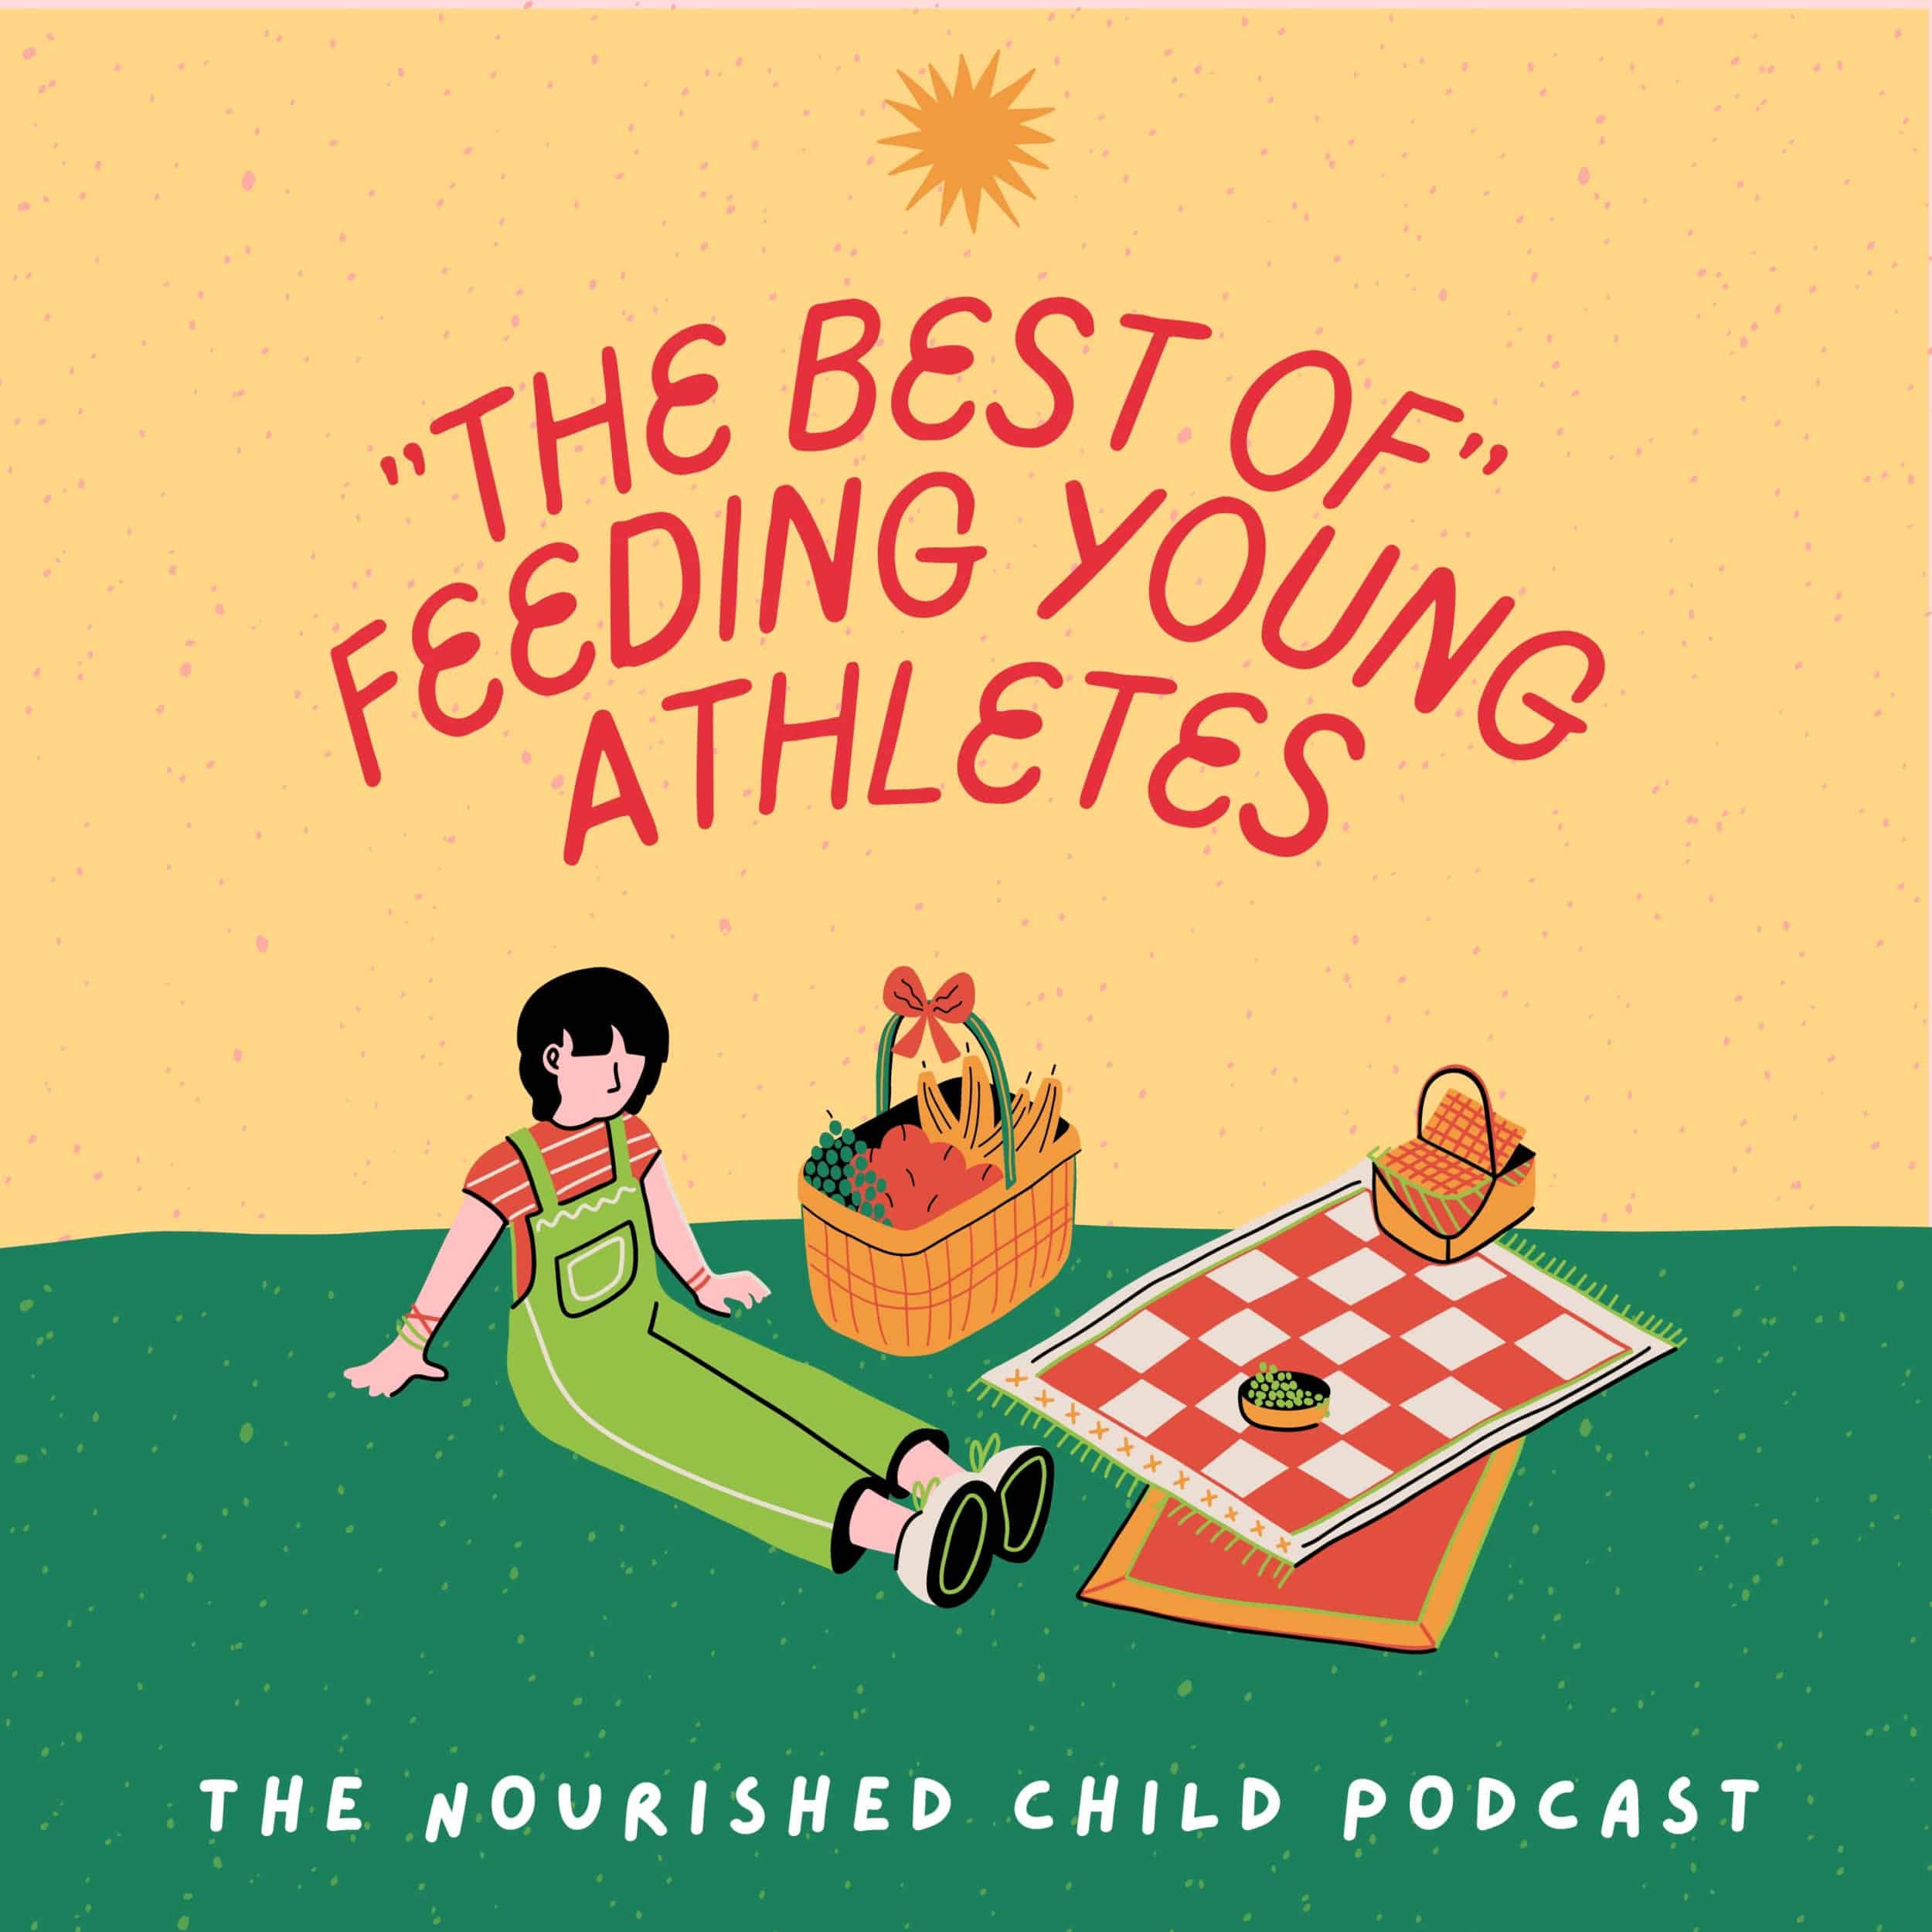 The Best of Feeding Young Athletes on The Nourished Child